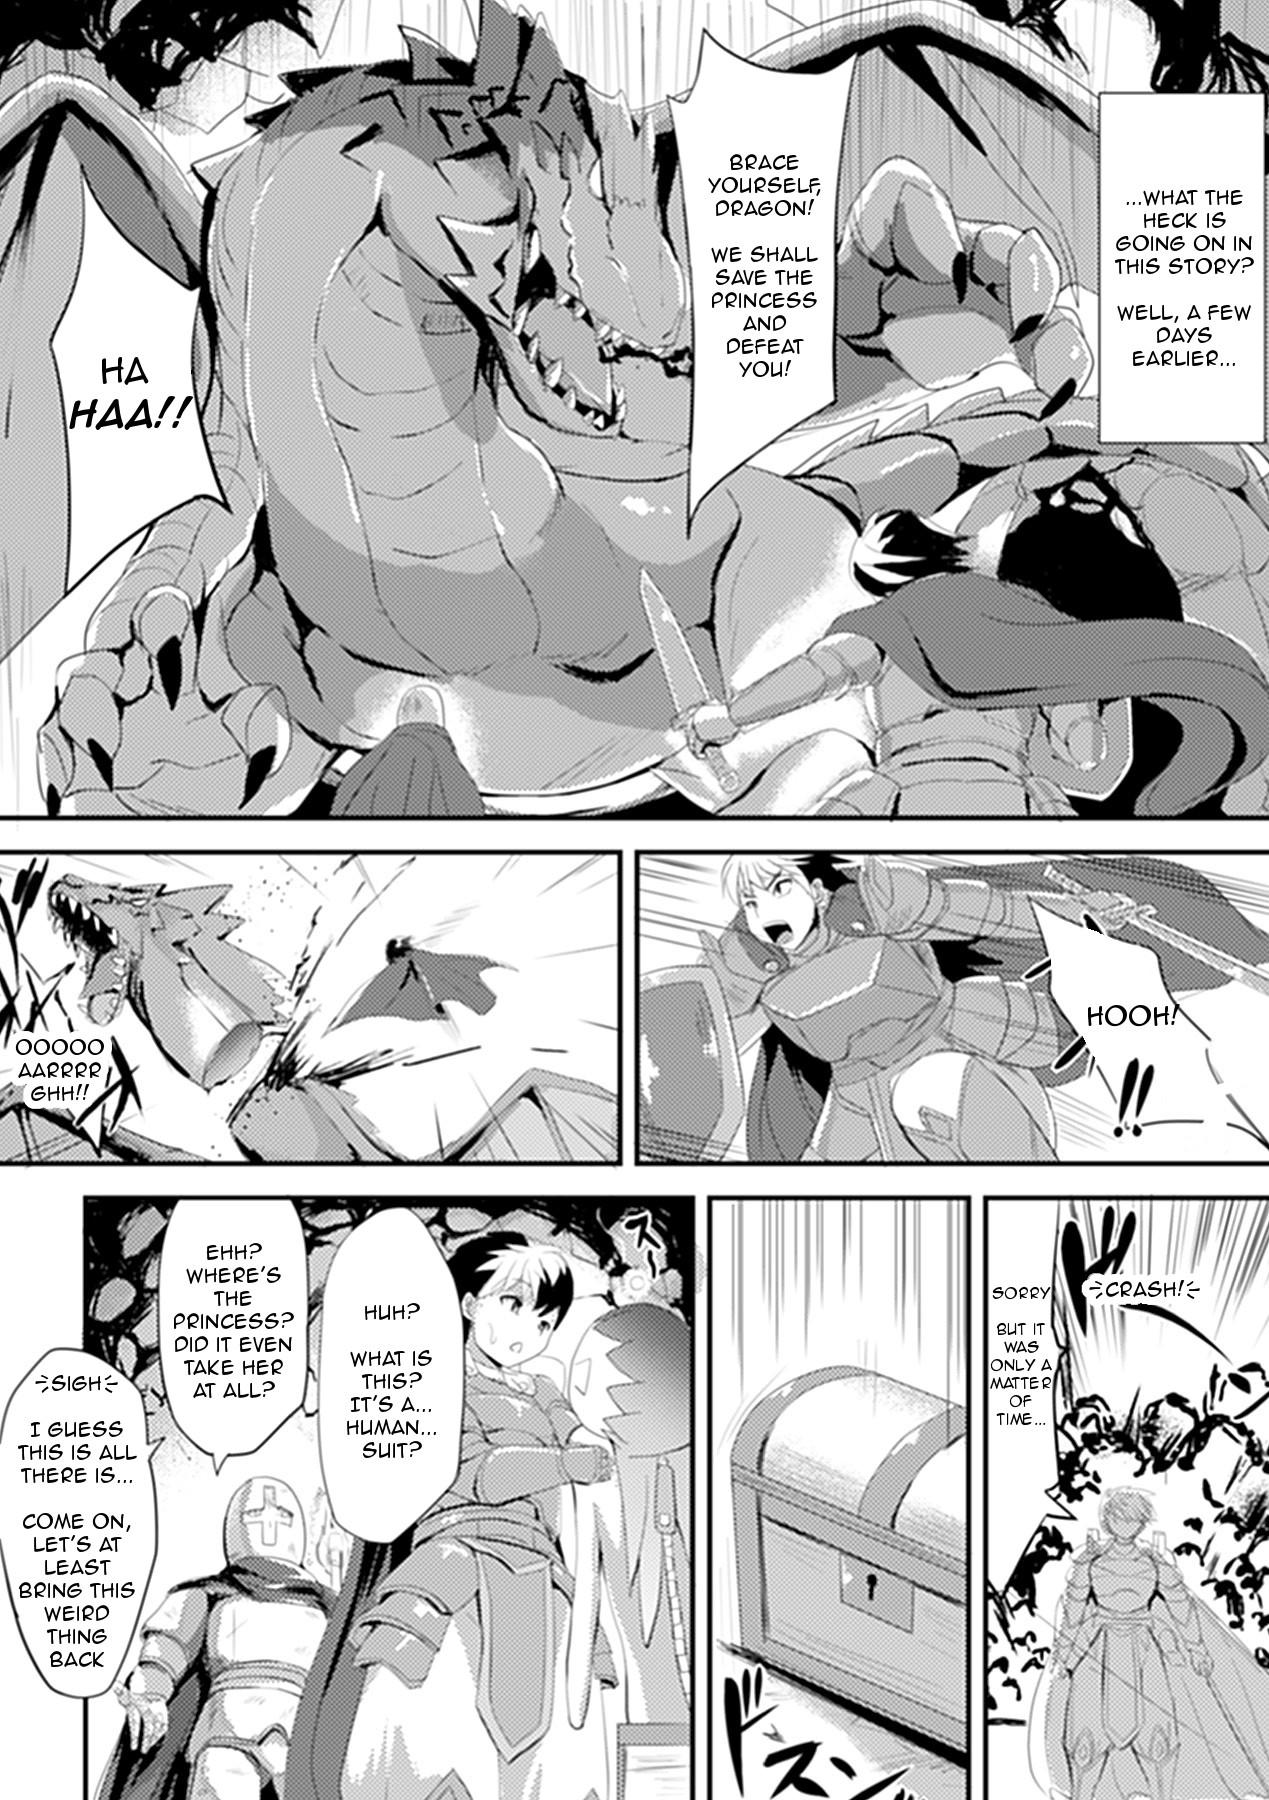 Breasts Marionette Princess Blow Job - Page 2